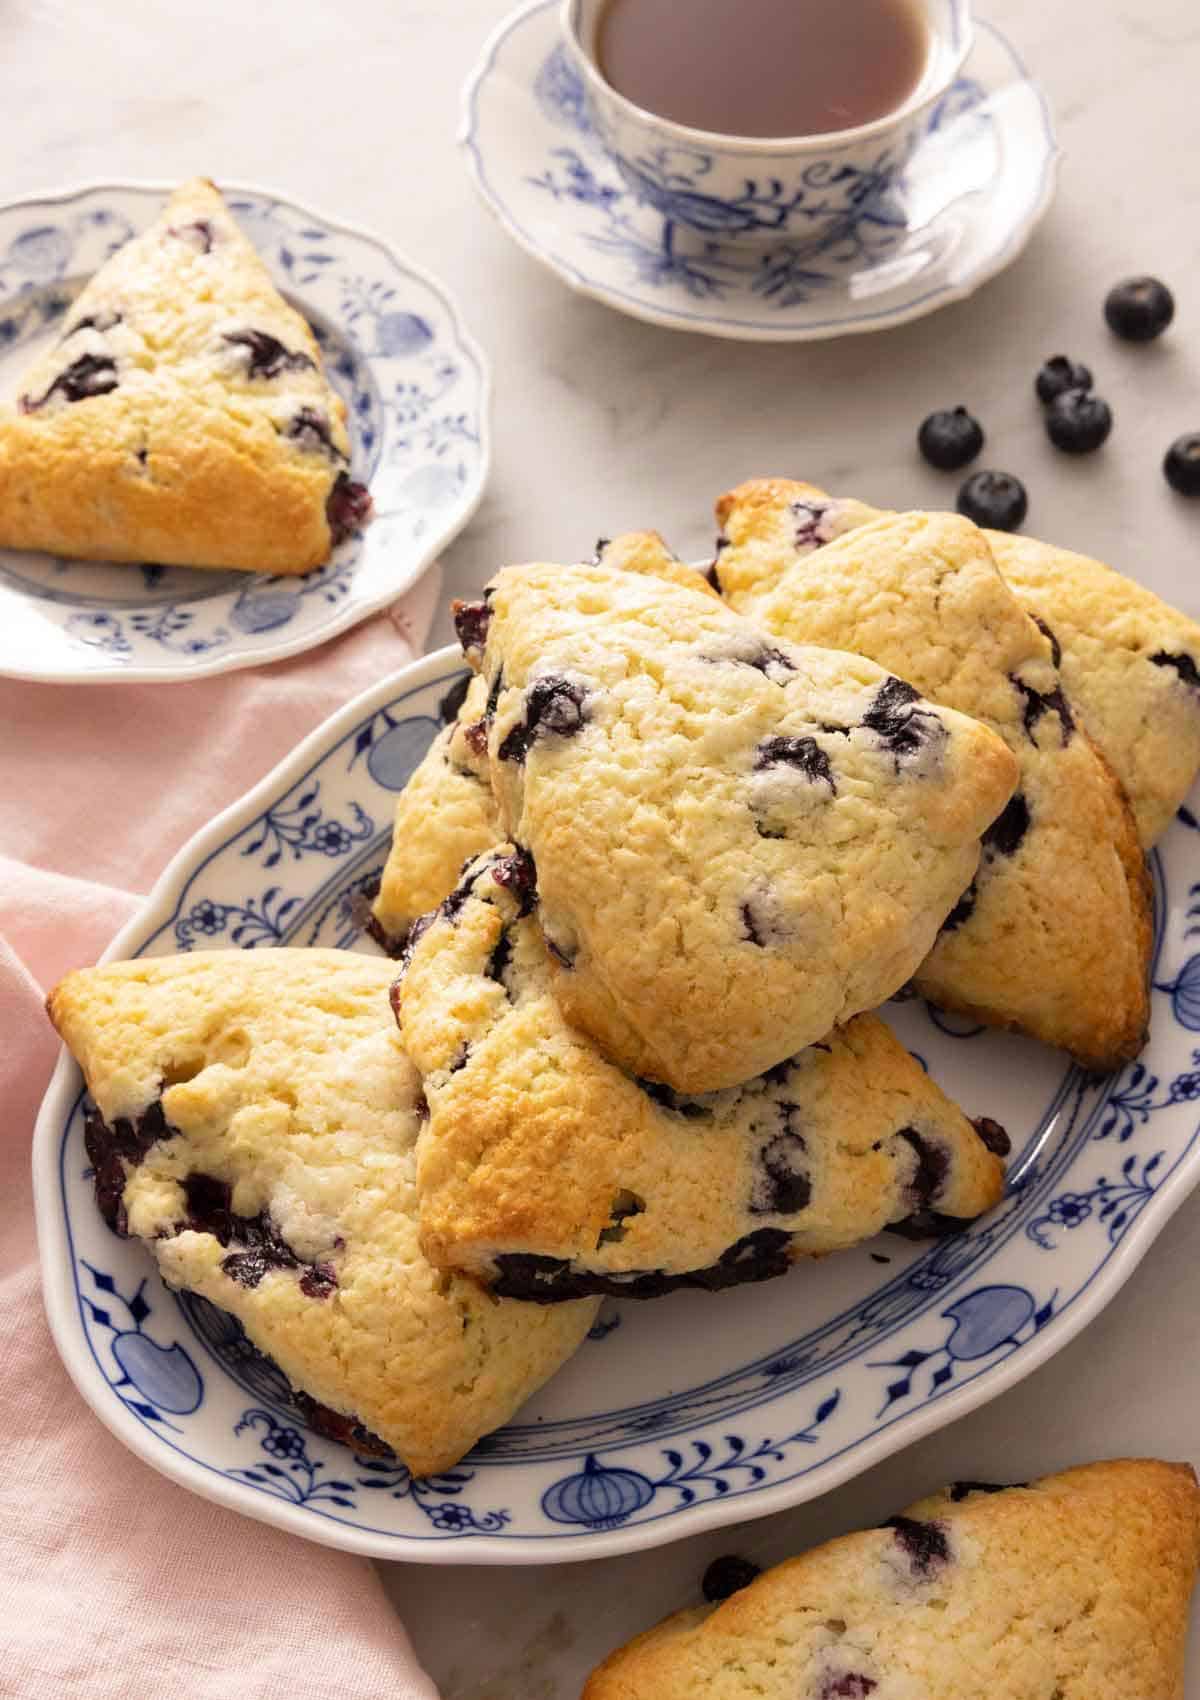 An oval platter of blueberry scones in front of a cup of tea and scattered blueberries on the counter.